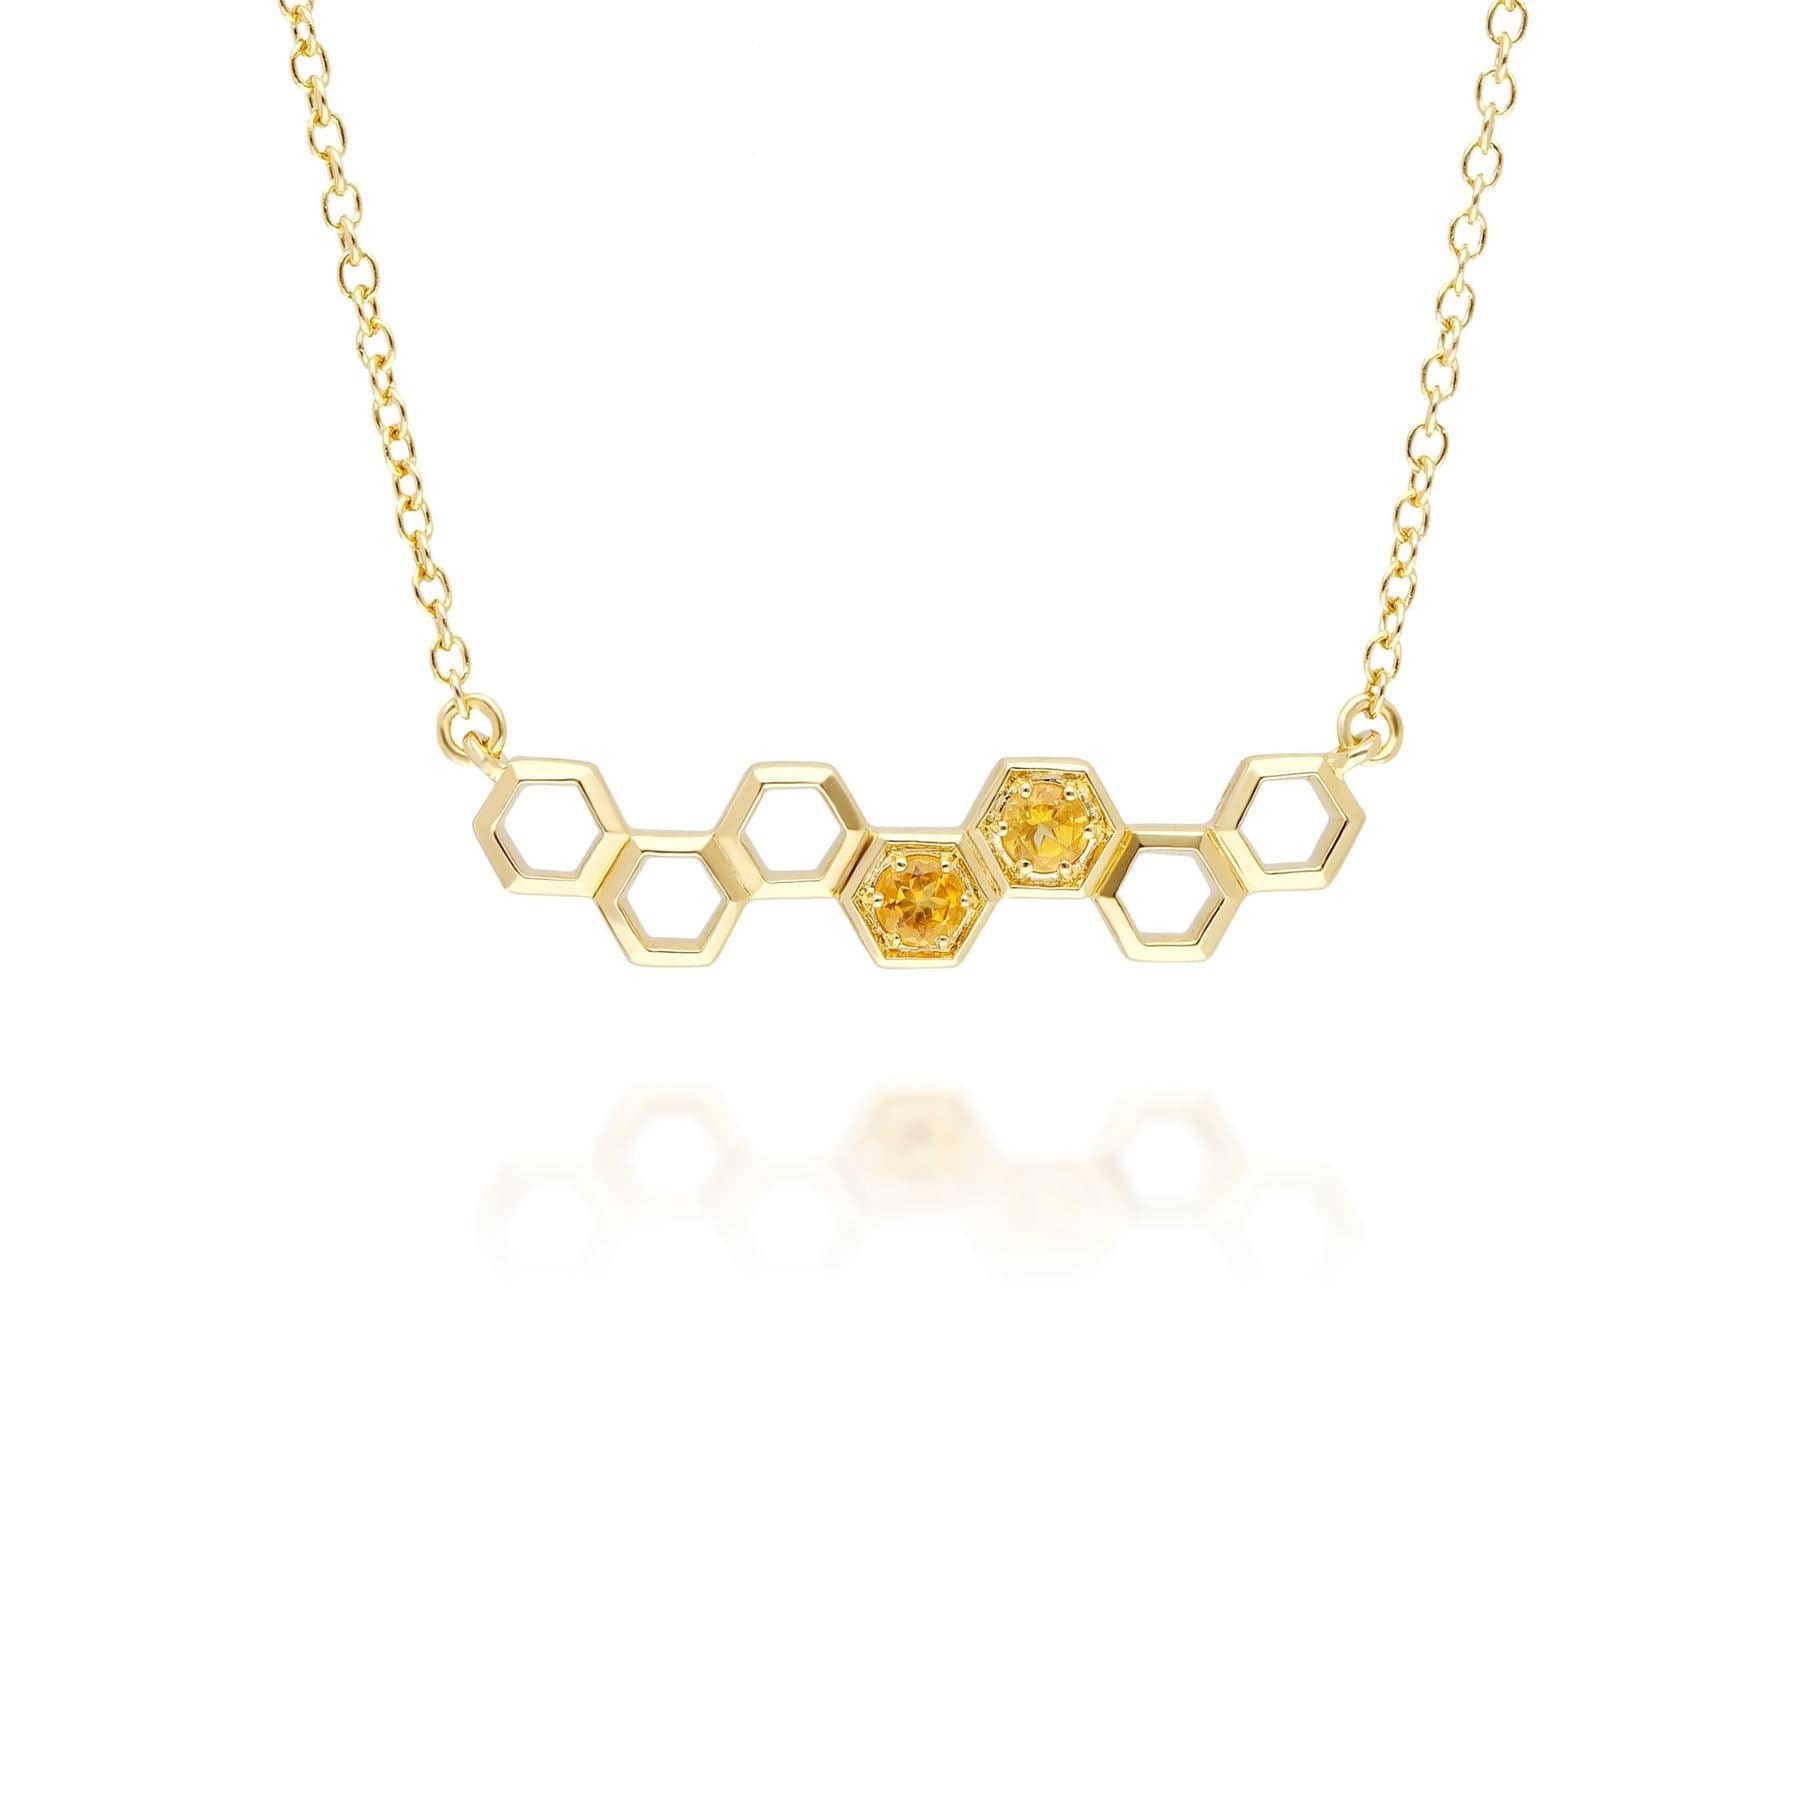 Image of Honeycomb Inspired Citrine Link Necklace in 9ct Yellow Gold